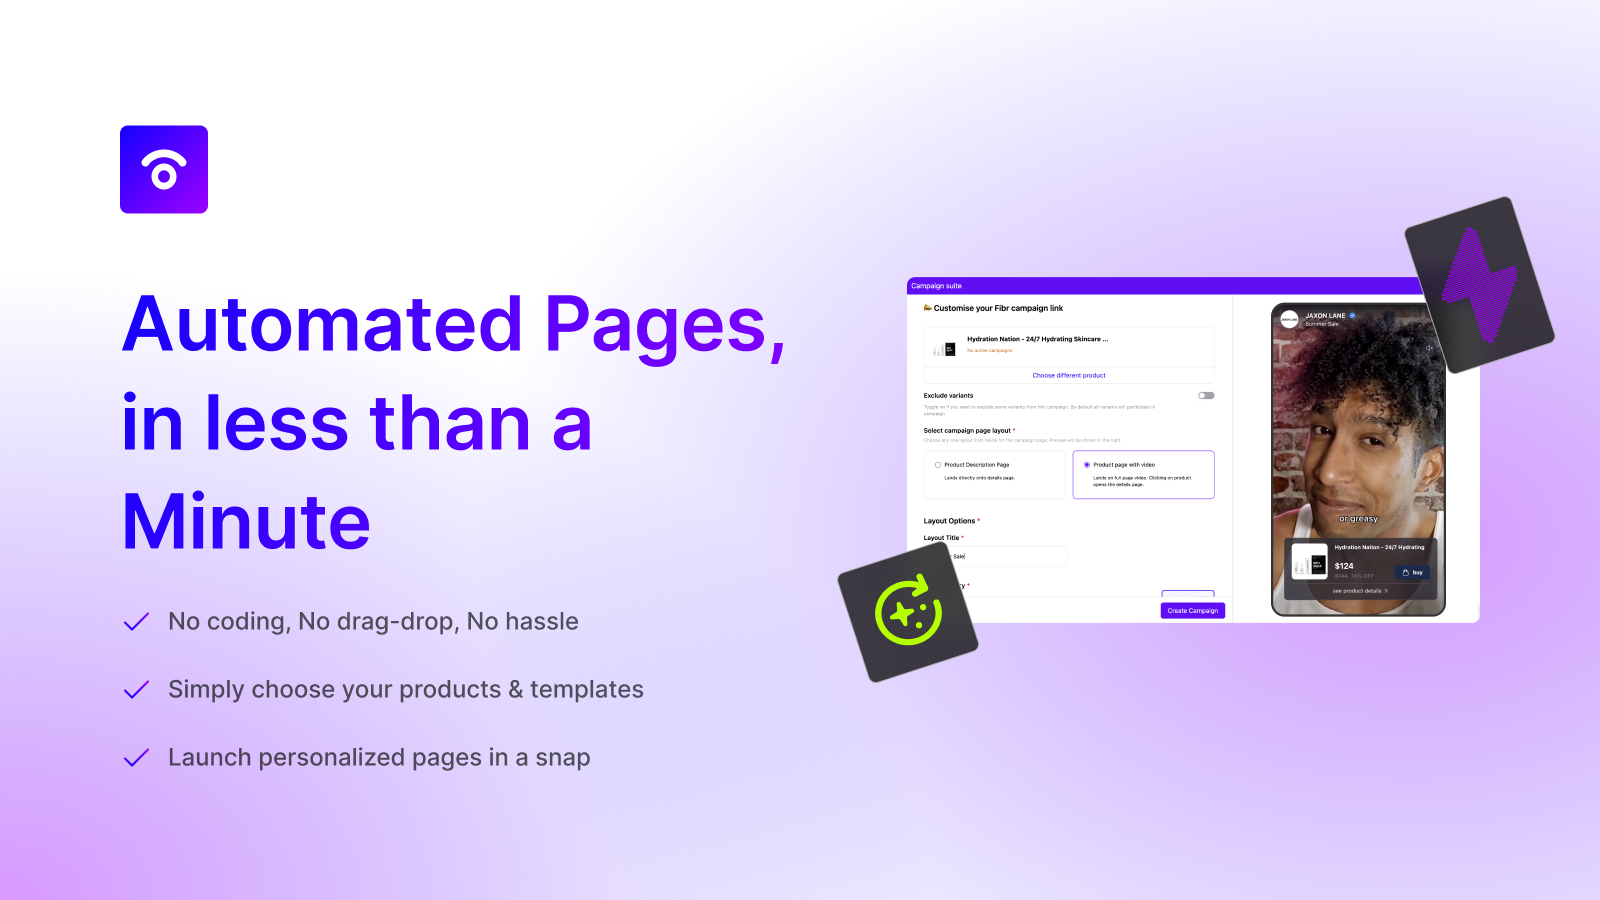  Quick Templates, Automated Landing Pages, No drag and drop